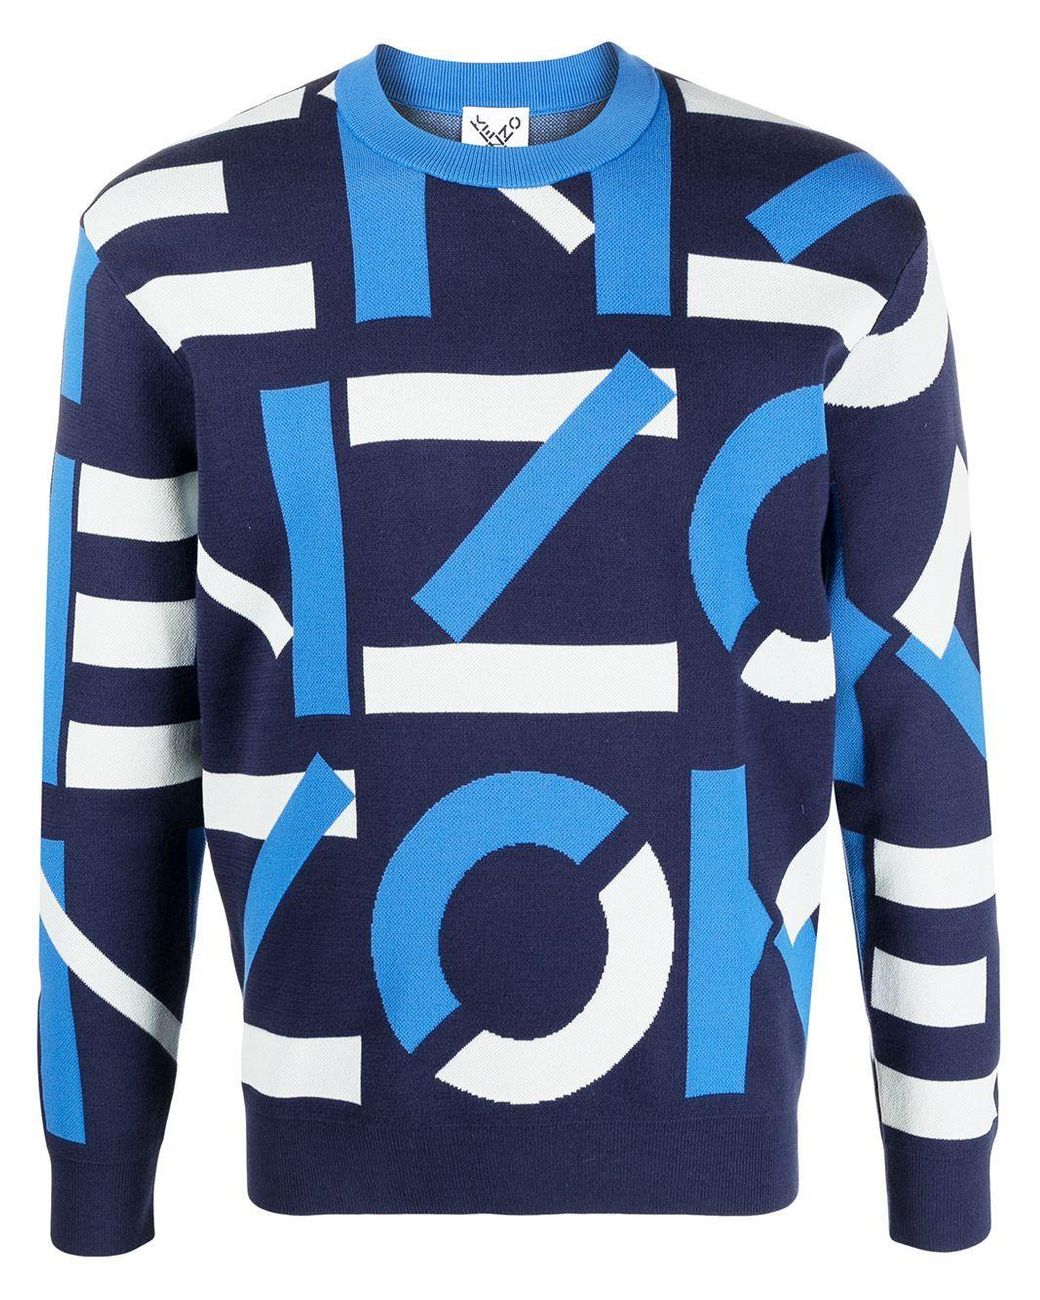 KENZO Cotton Sweater in Blue for Men - Save 24% - Lyst